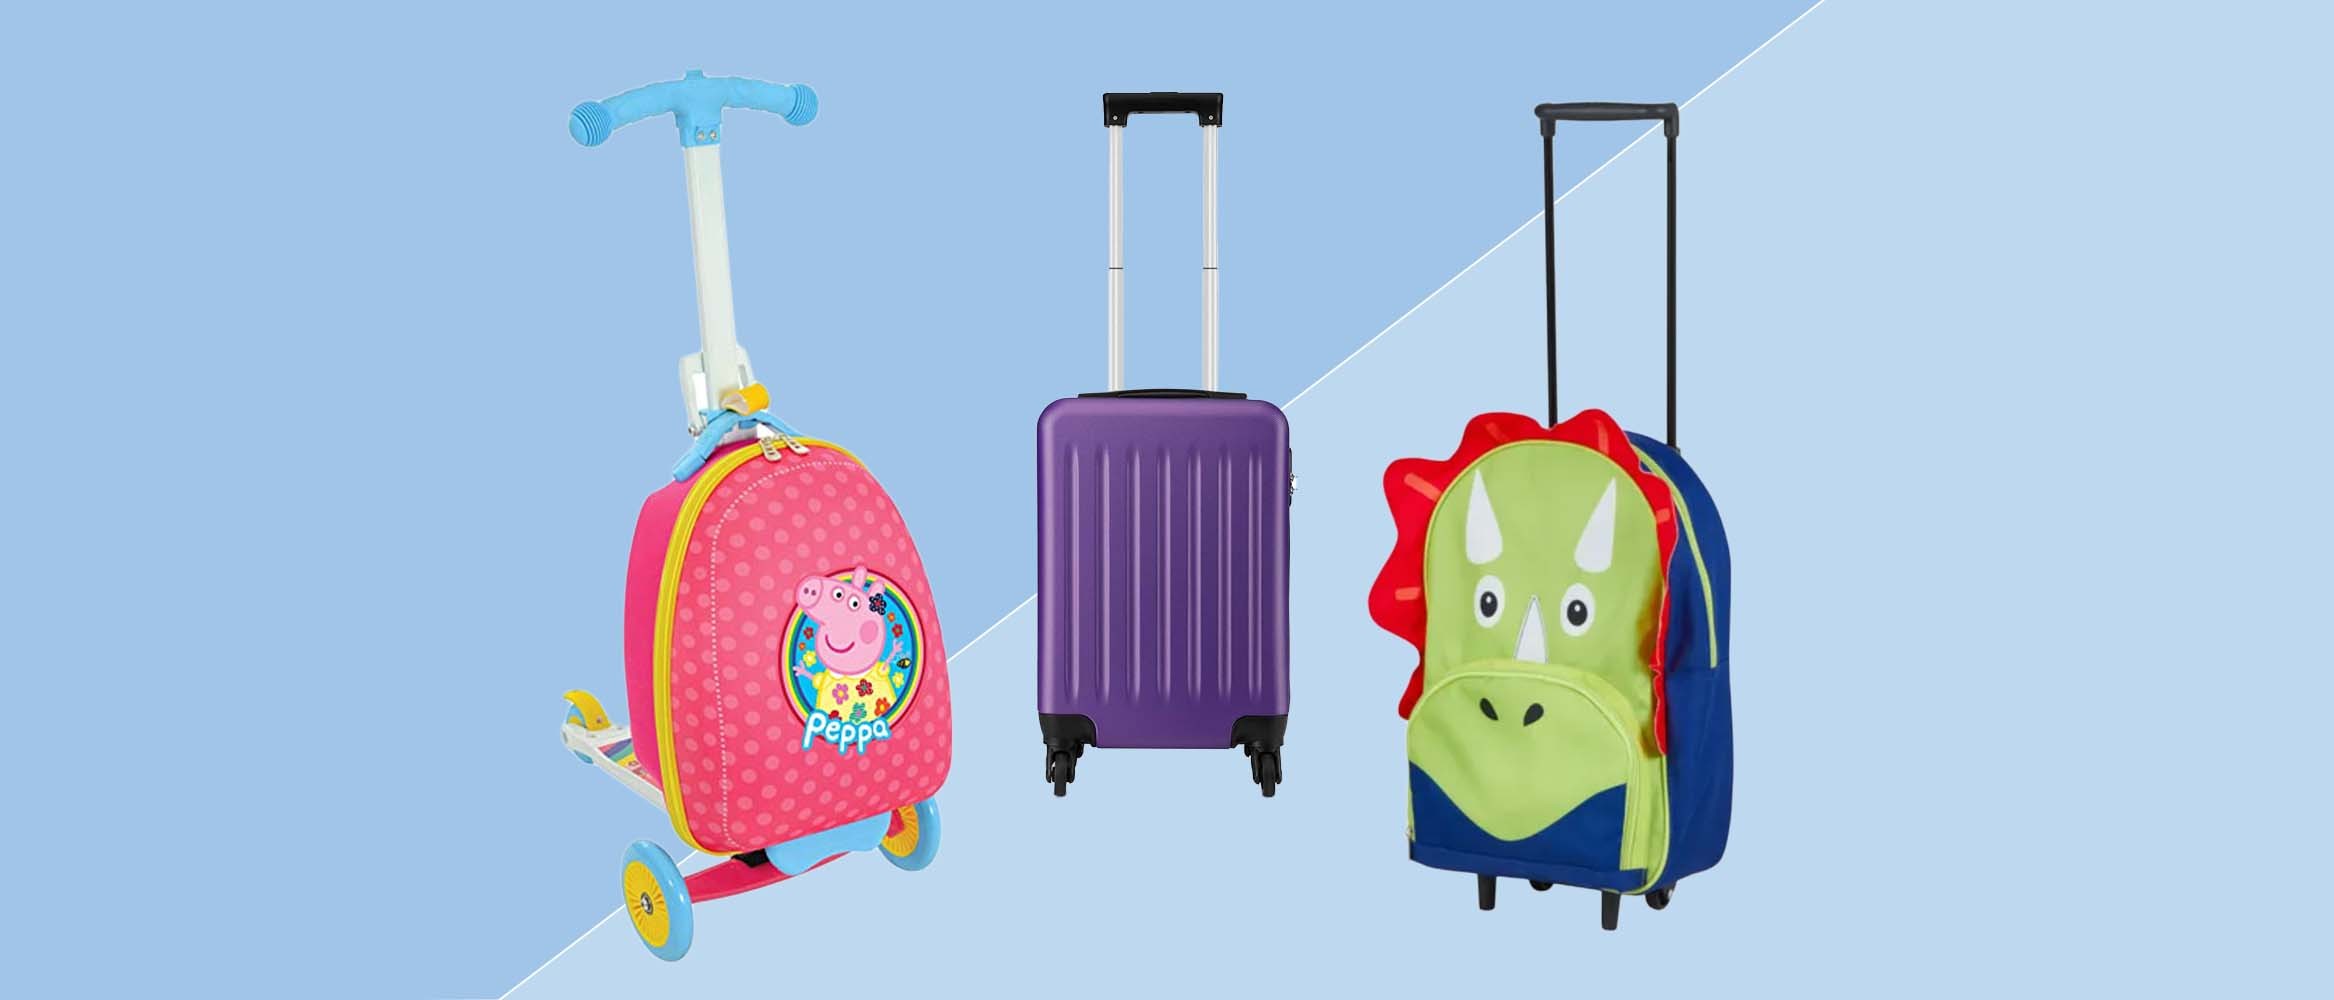 The Best Ride-On Suitcases For Kids Will Make Your Next Family Vacation a  Total Blast